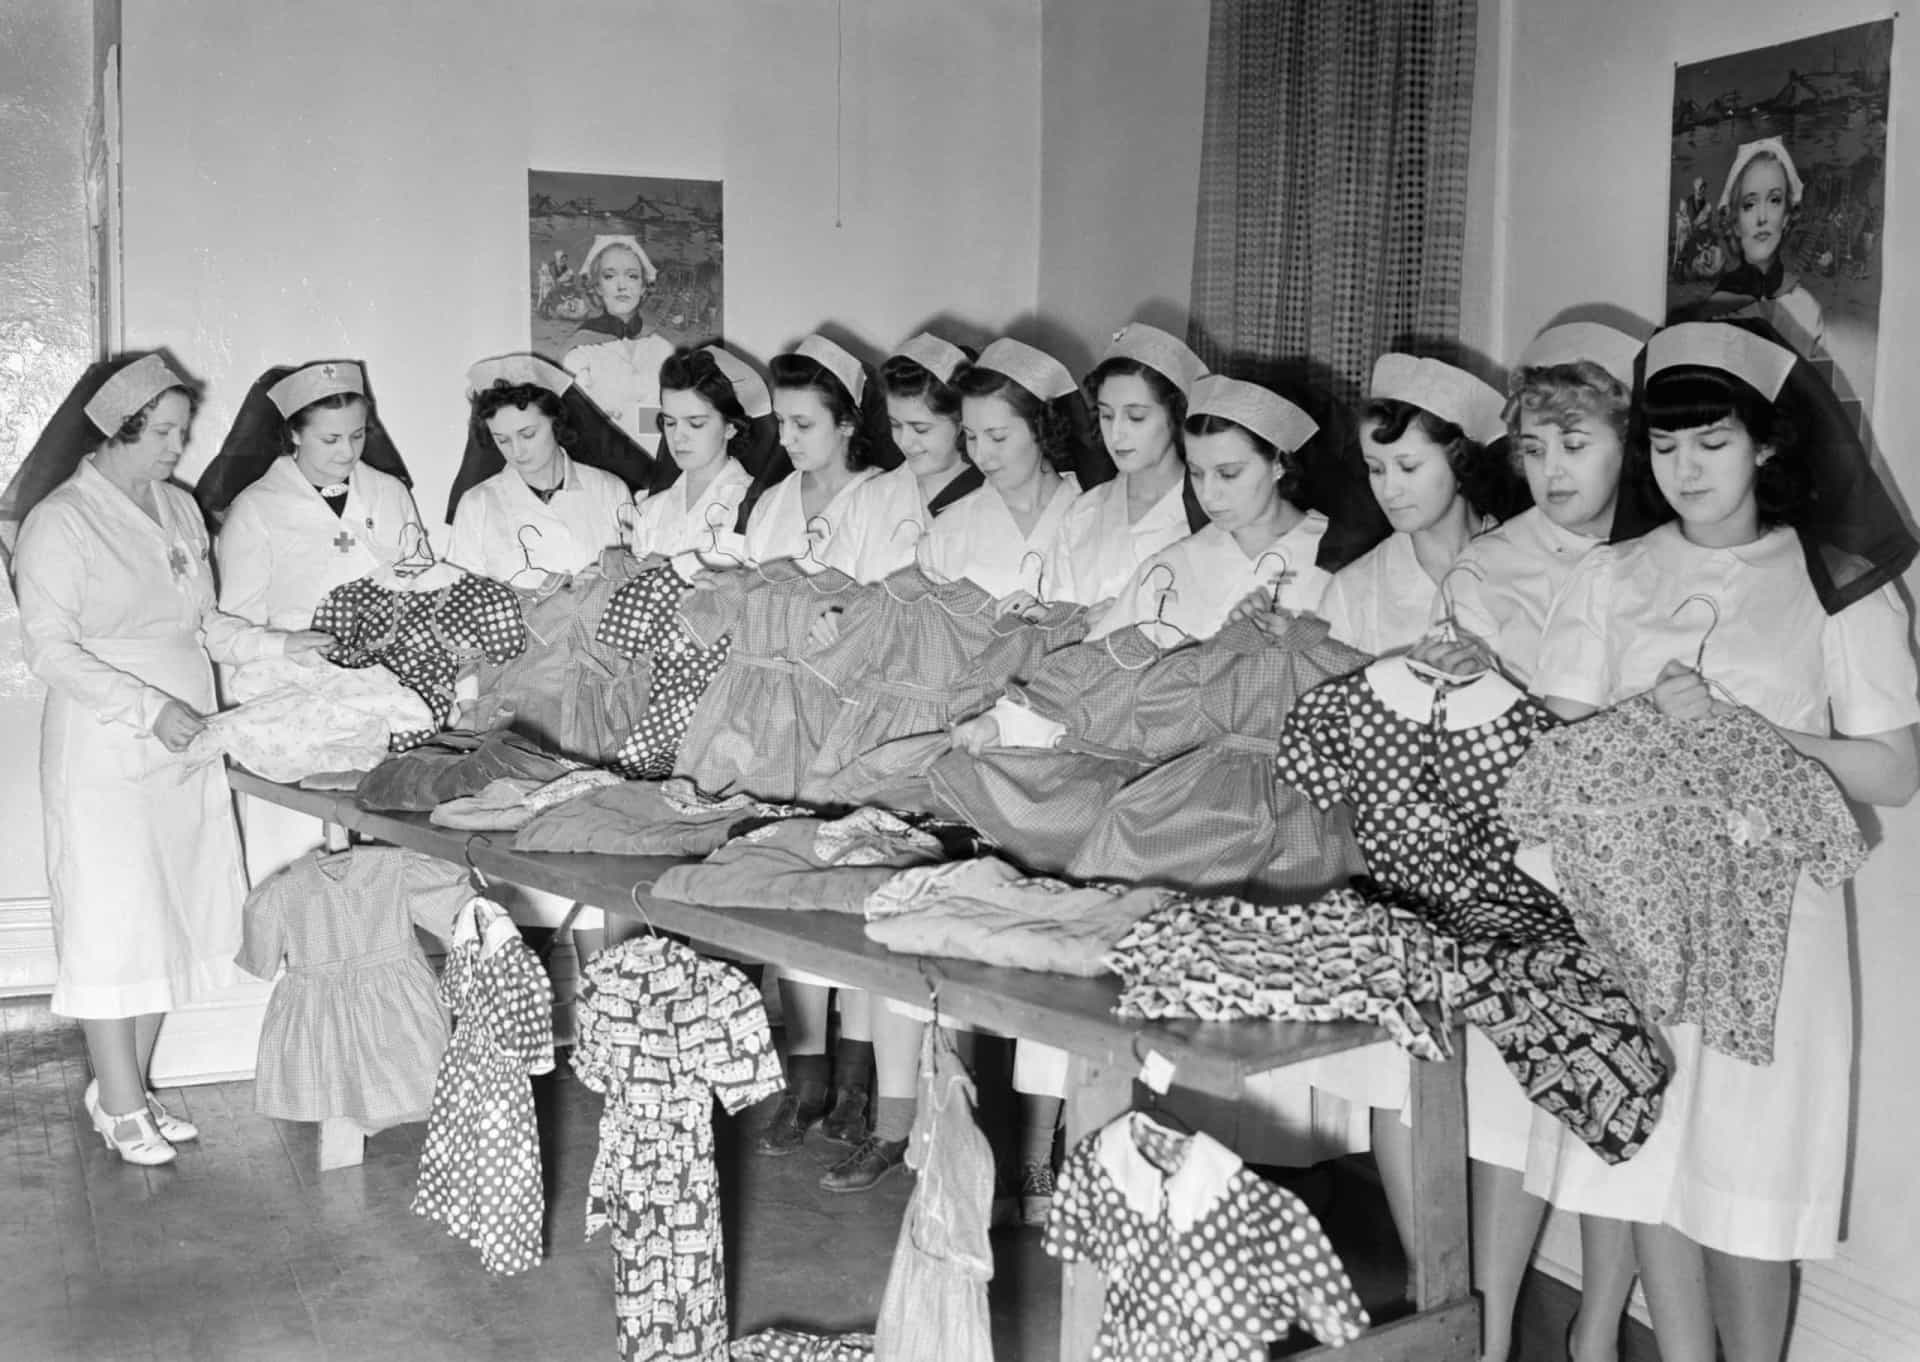 <p>Red Cross nurses are seen here sewing dresses for children as part of the organization's war refugee relief program.</p><p>You may also like:<a href="https://www.starsinsider.com/n/281966?utm_source=msn.com&utm_medium=display&utm_campaign=referral_description&utm_content=517253en-us"> A look at China’s most impressive knock-off wonders</a></p>